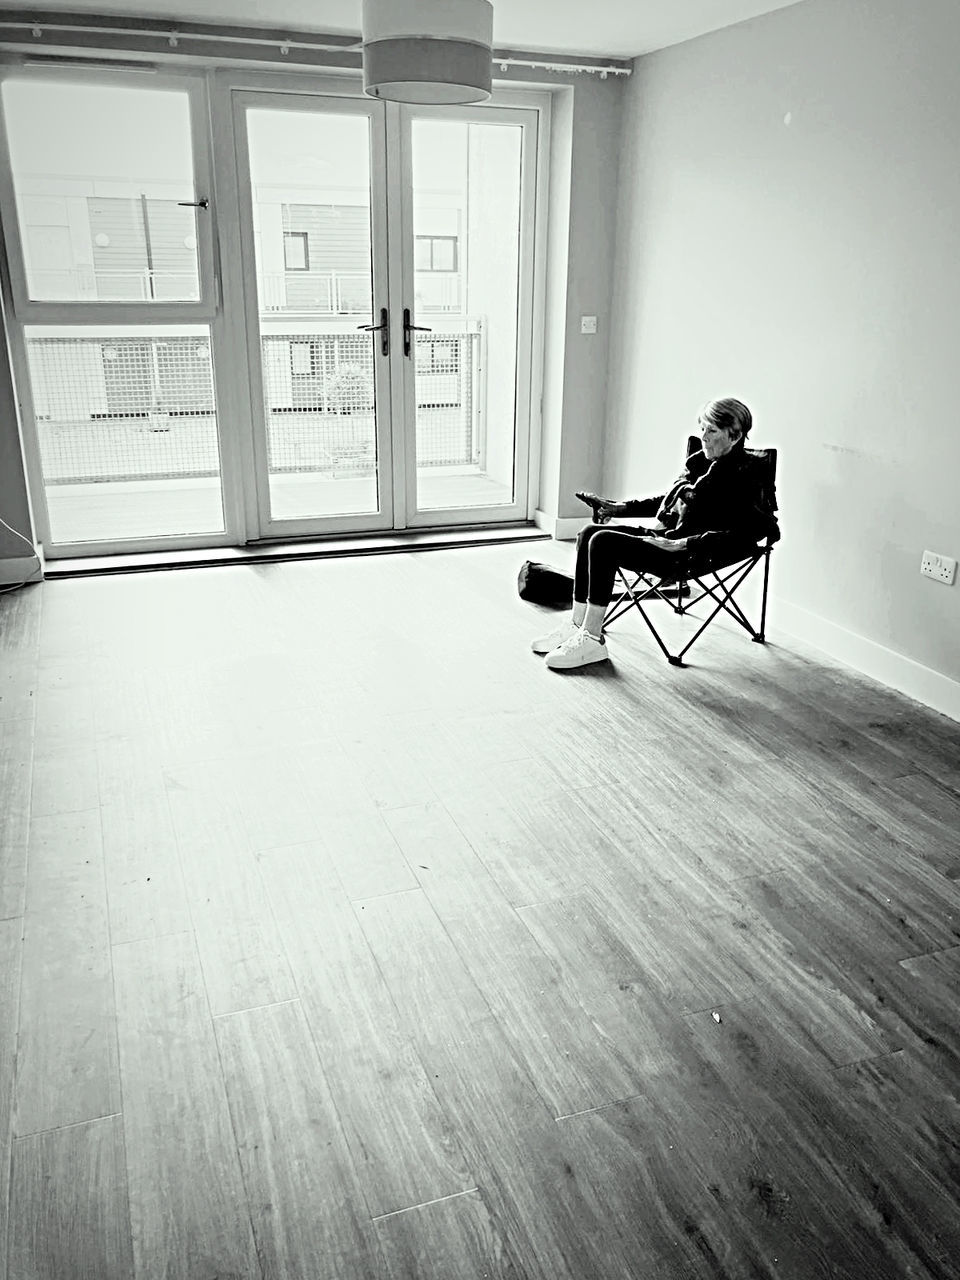 white, black, floor, indoors, flooring, black and white, monochrome, one person, light, home interior, full length, monochrome photography, house, window, adult, laminate flooring, wood flooring, sitting, hardwood floor, interior design, architecture, loneliness, wood, hardwood, seat, home, person, relaxation, chair, door, lifestyles, entrance, furniture, day, side view